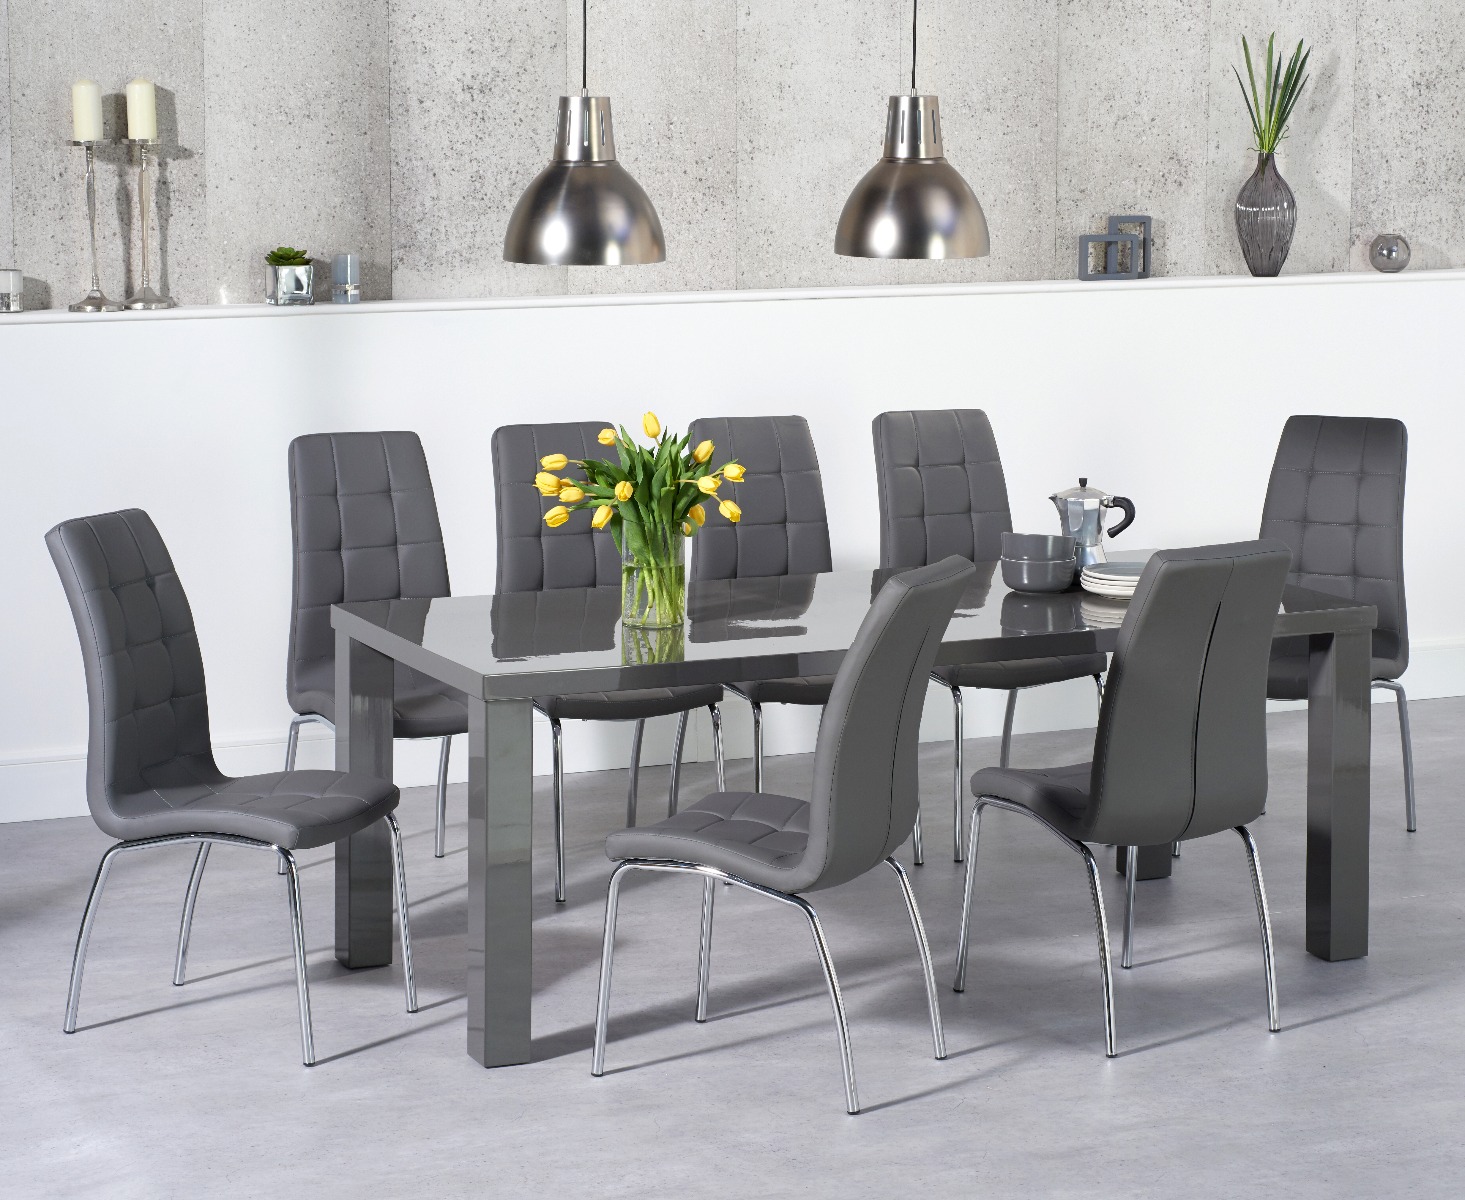 High Gloss Dining Table With Calgary Chairs, High Gloss Dining Table 8 Chairs